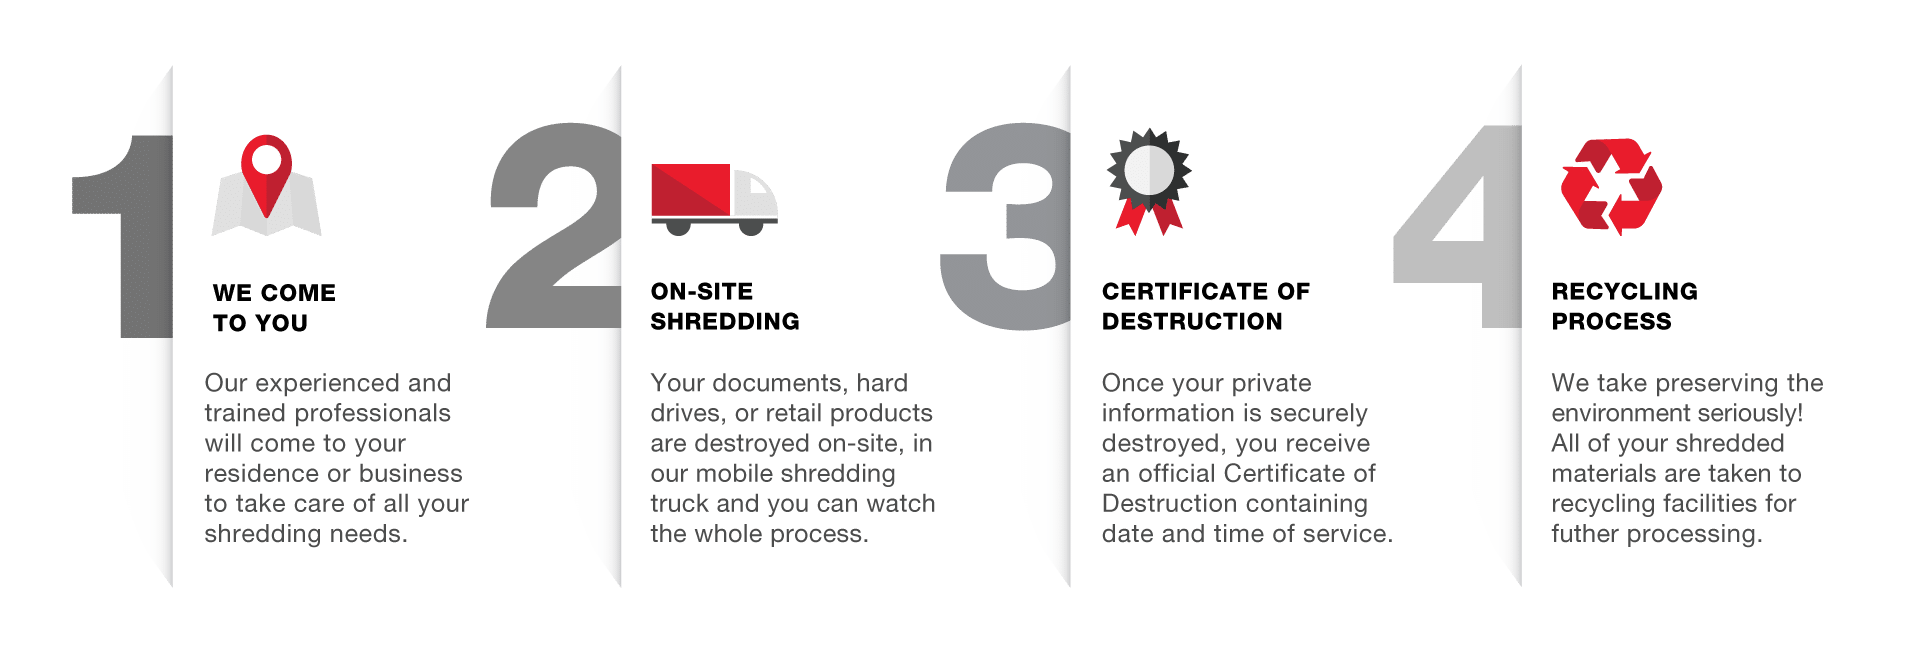 4 steps of our shredding process: We come to you; Shredding happens on-site and you can witness it; You receive a certificate of destruction; All shredded materials are recycled.